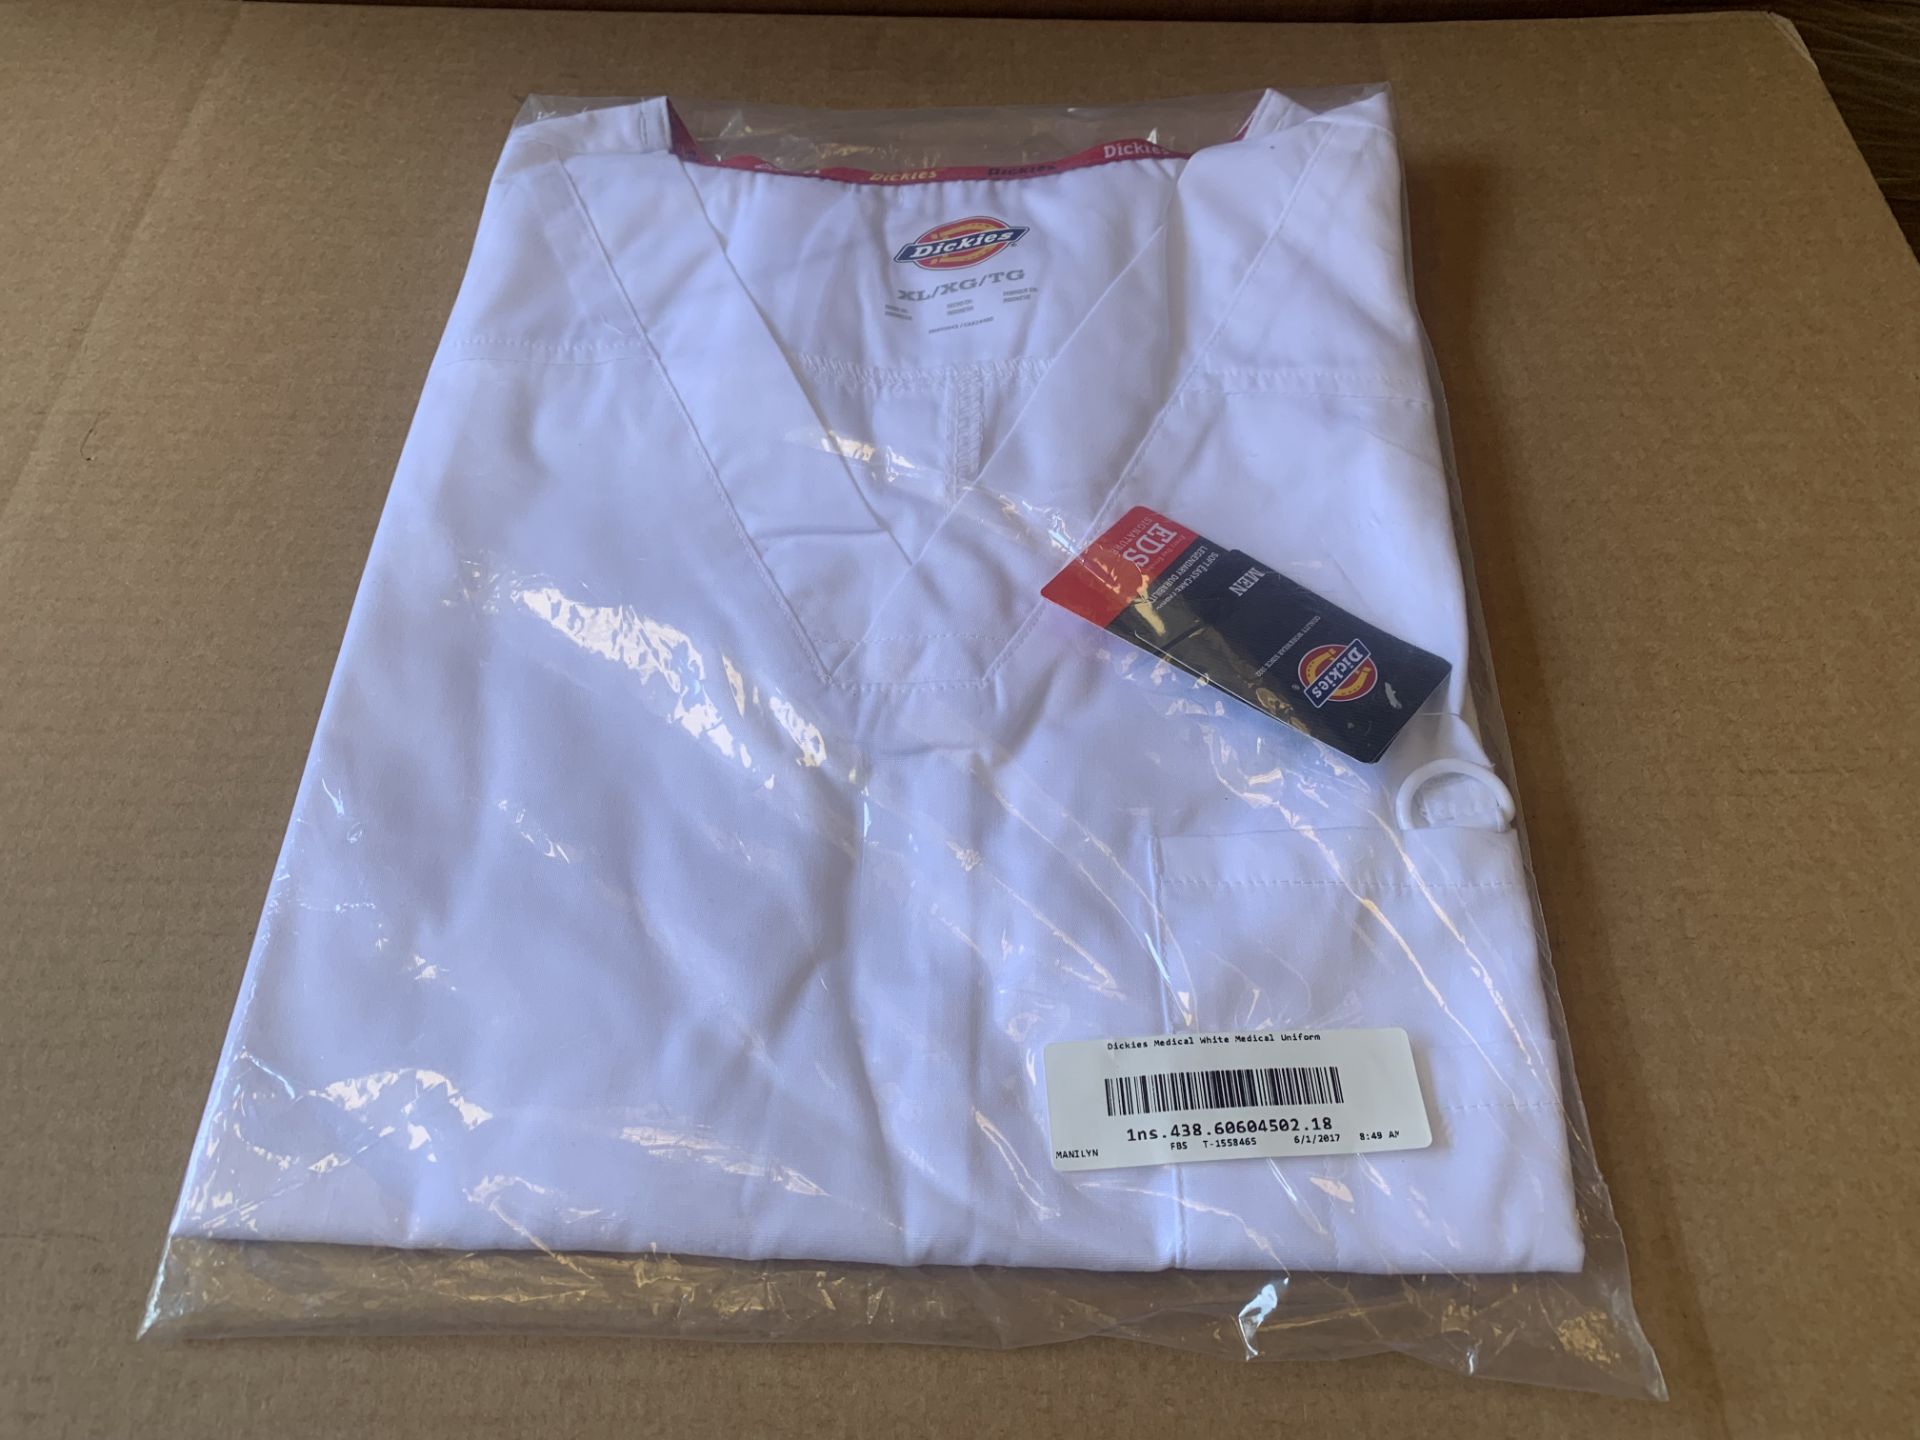 12 X BRAND NEW DICKIES MEDICAL WHITE MEDICAL UNIFORM TOPS SIZE XL